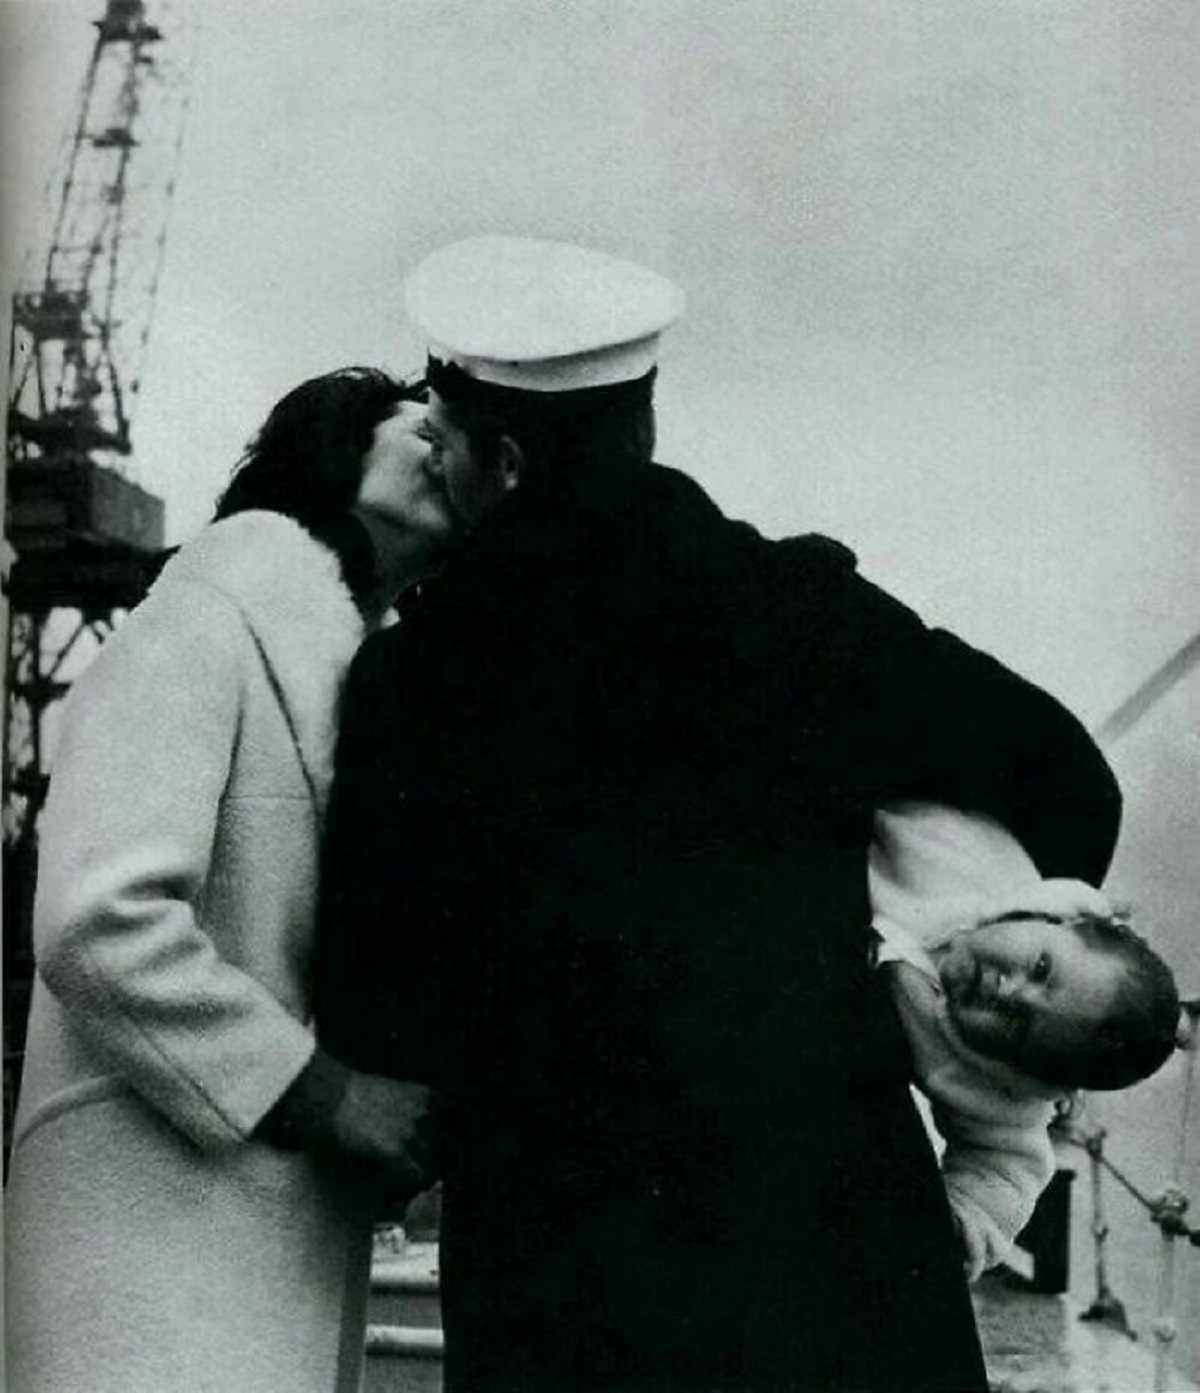 A Sailor "Meets" His Baby For The First Time After Fourteen Months At Sea, 1940s